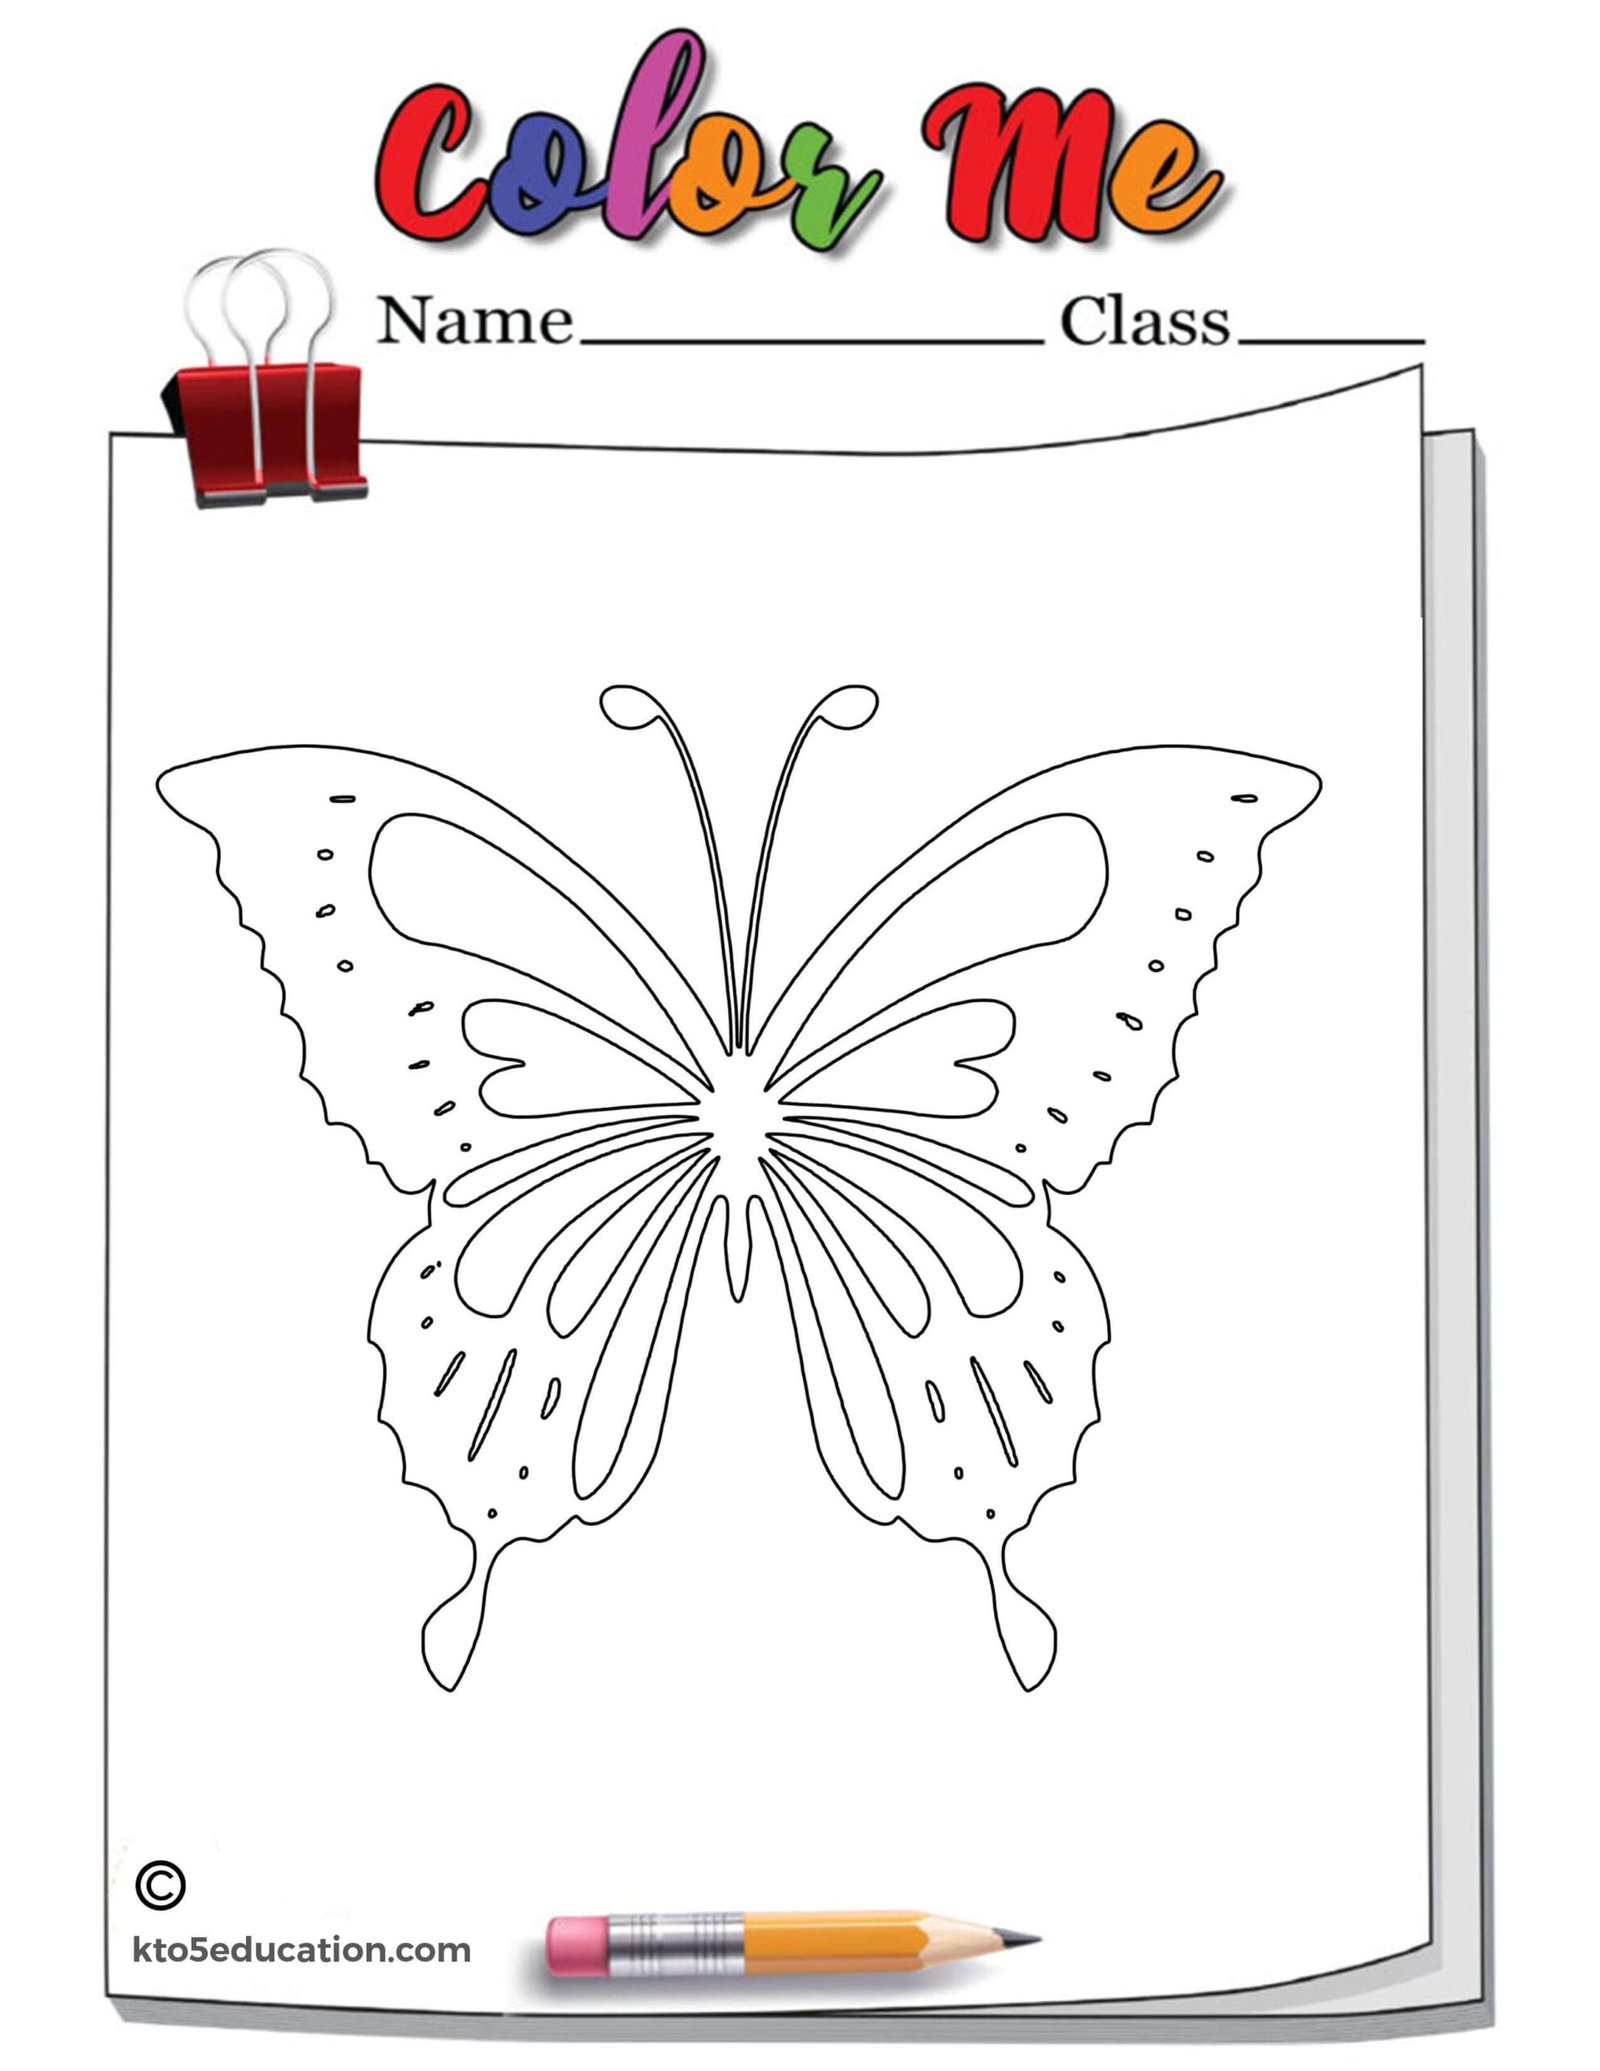 Giant Butterfly Outline Coloring Page